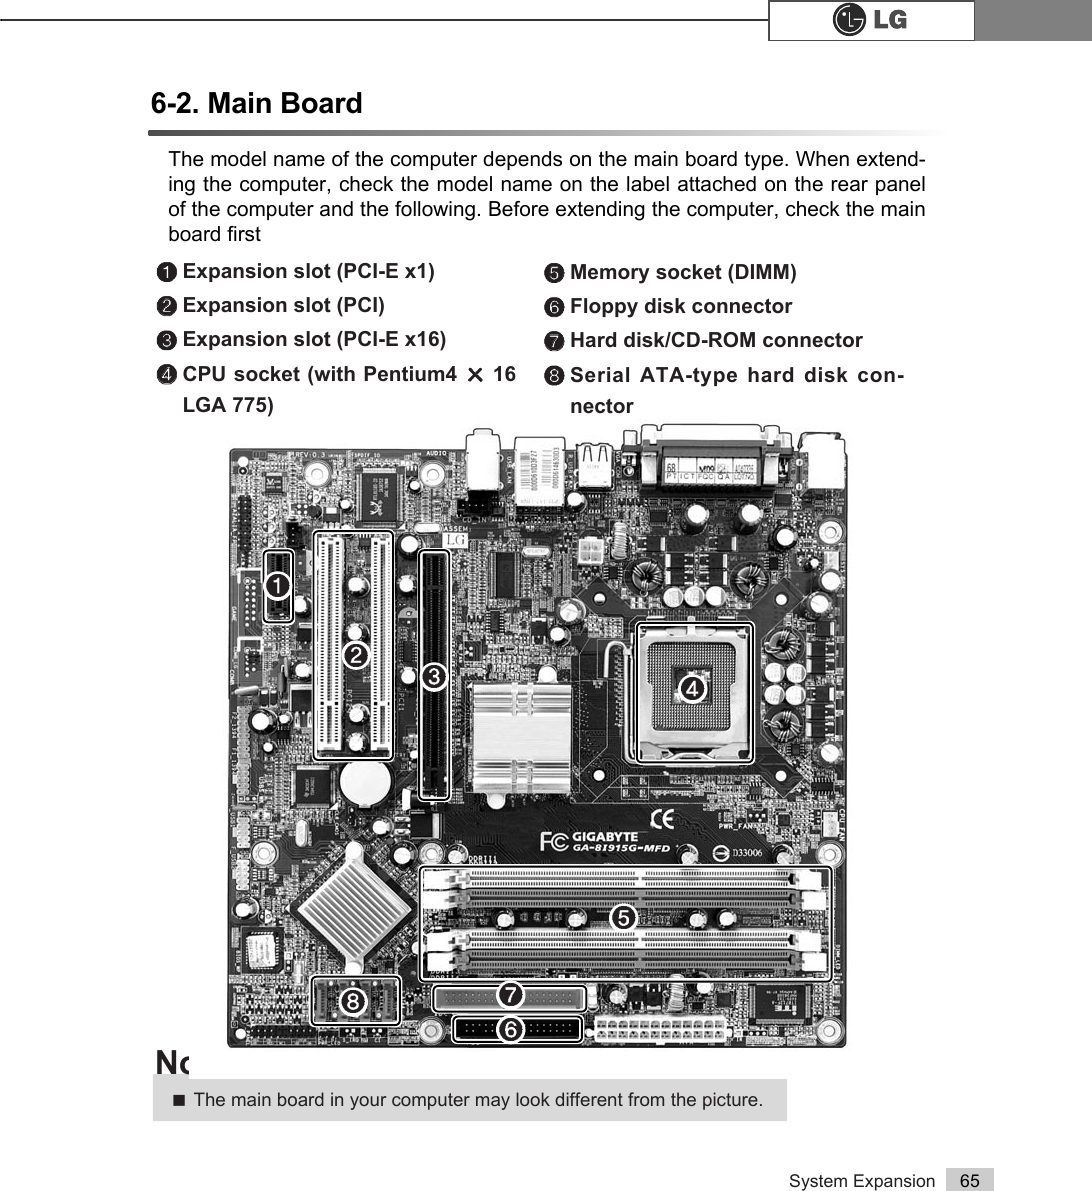 System Expansion 656-2. Main Board The model name of the computer depends on the main board type. When extend-ing the computer, check the model name on the label attached on the rear panelof the computer and the following. Before extending the computer, check the mainboard first℘Expansion slot (PCI-E x1)ℙℙExpansion slot (PCI) ℚExpansion slot (PCI-E x16)ℛℛCPU socket (with Pentium4 Á16LGA 775)ℜℜMemory socket (DIMM)ℝFloppy disk connector ℞℞Hard disk/CD-ROM connector℟Serial ATA-type hard disk con-nectorãThe main board in your computer may look different from the picture.Note℘ℙℚℛℜℝ℞℟